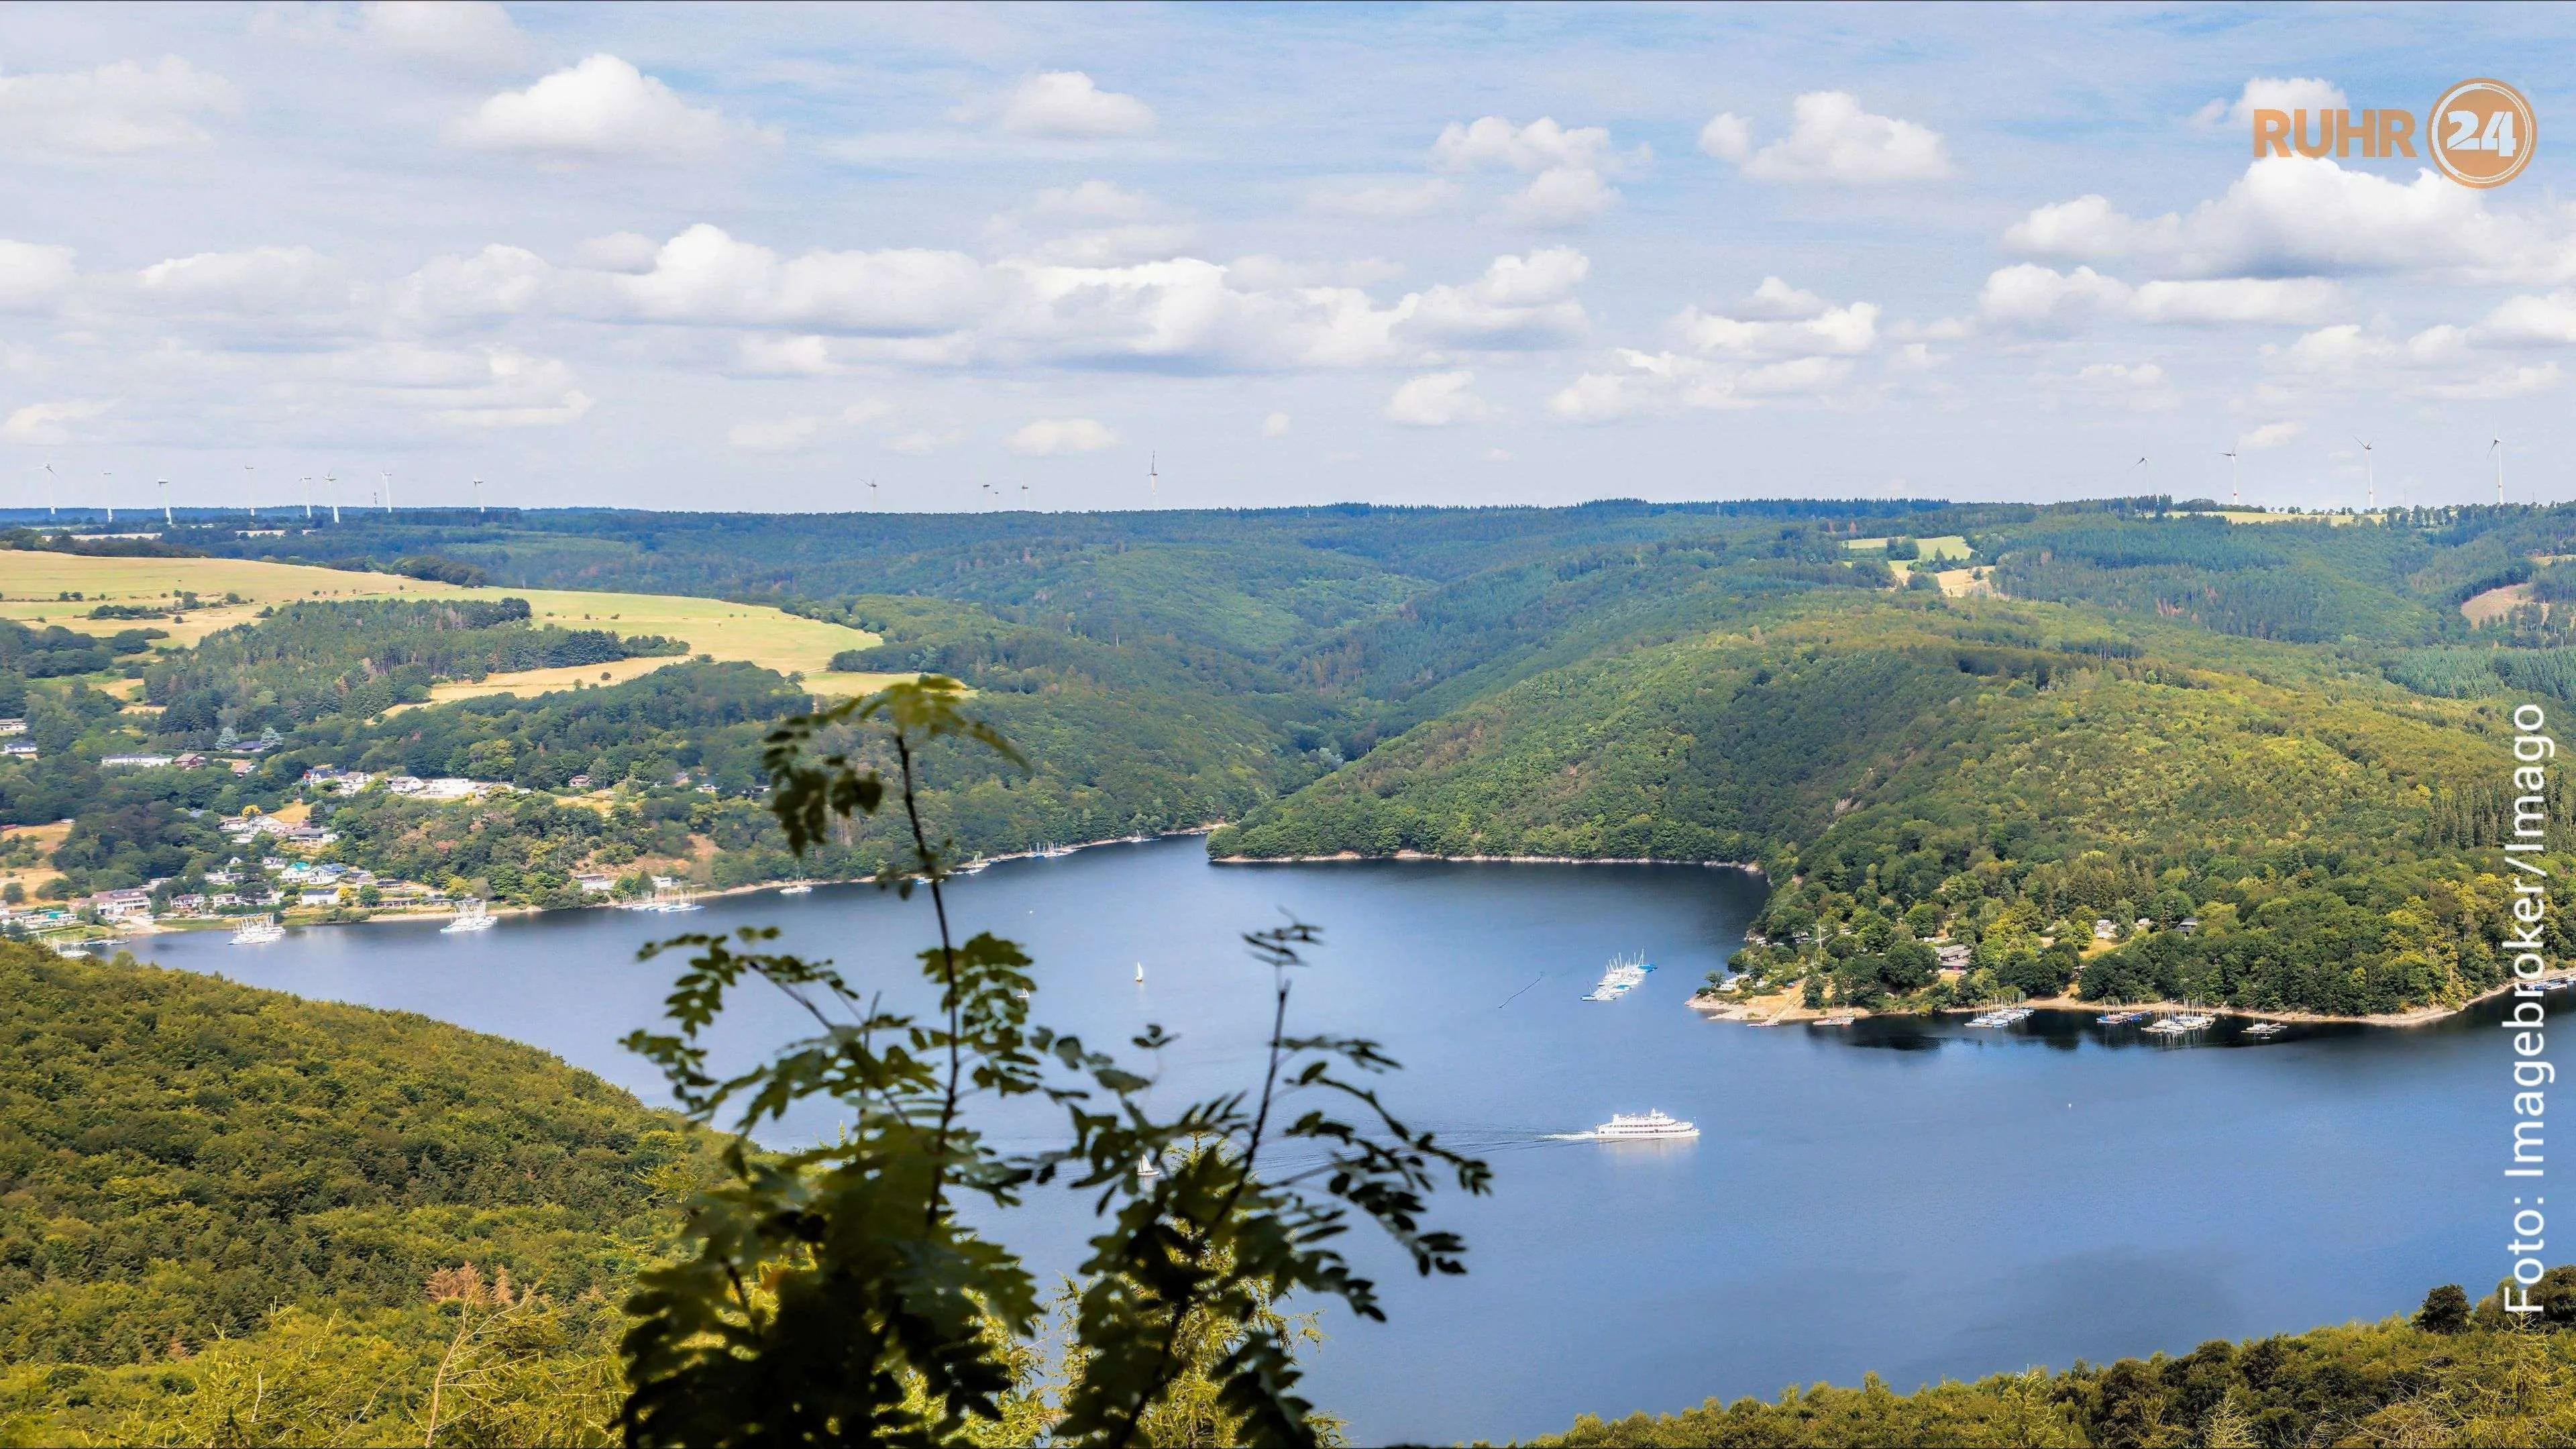 Nature and volcanoes: This is the popular destination Eifel